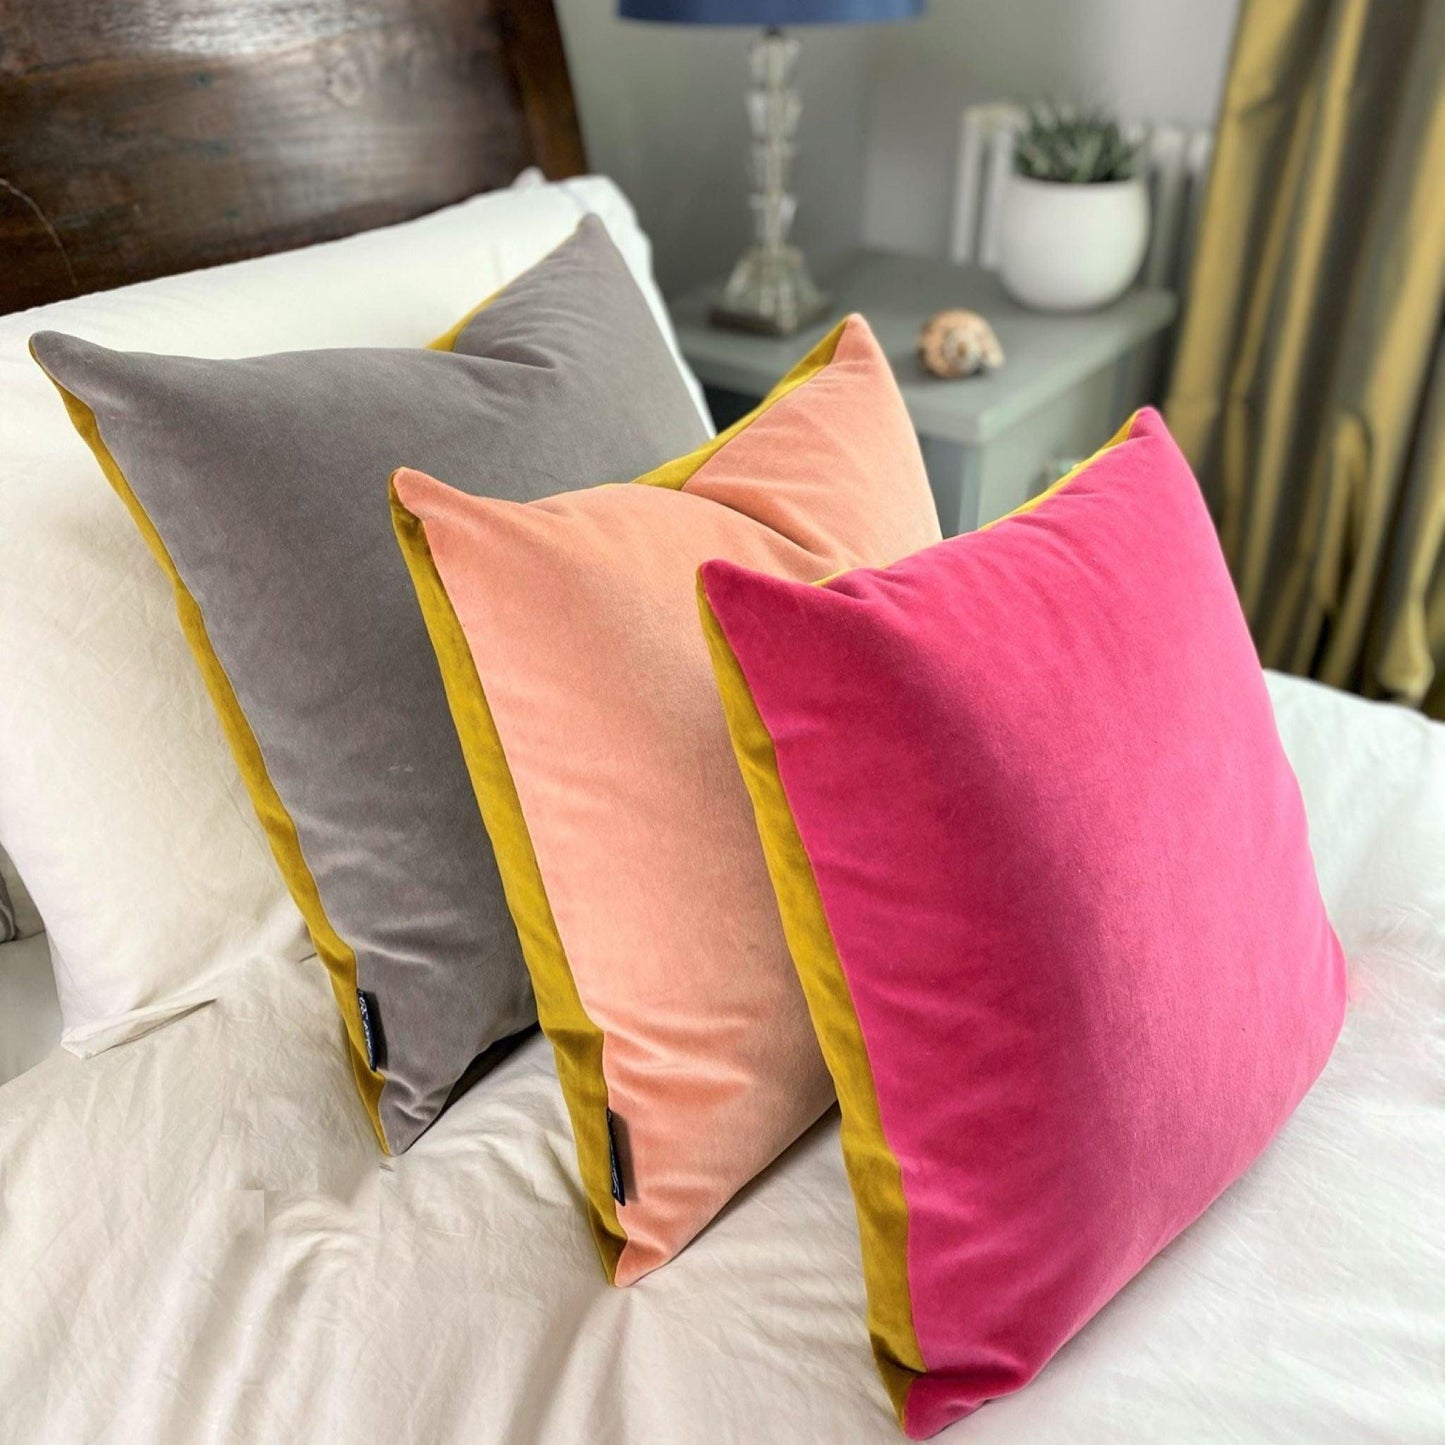 pink gold cushion luxe 39